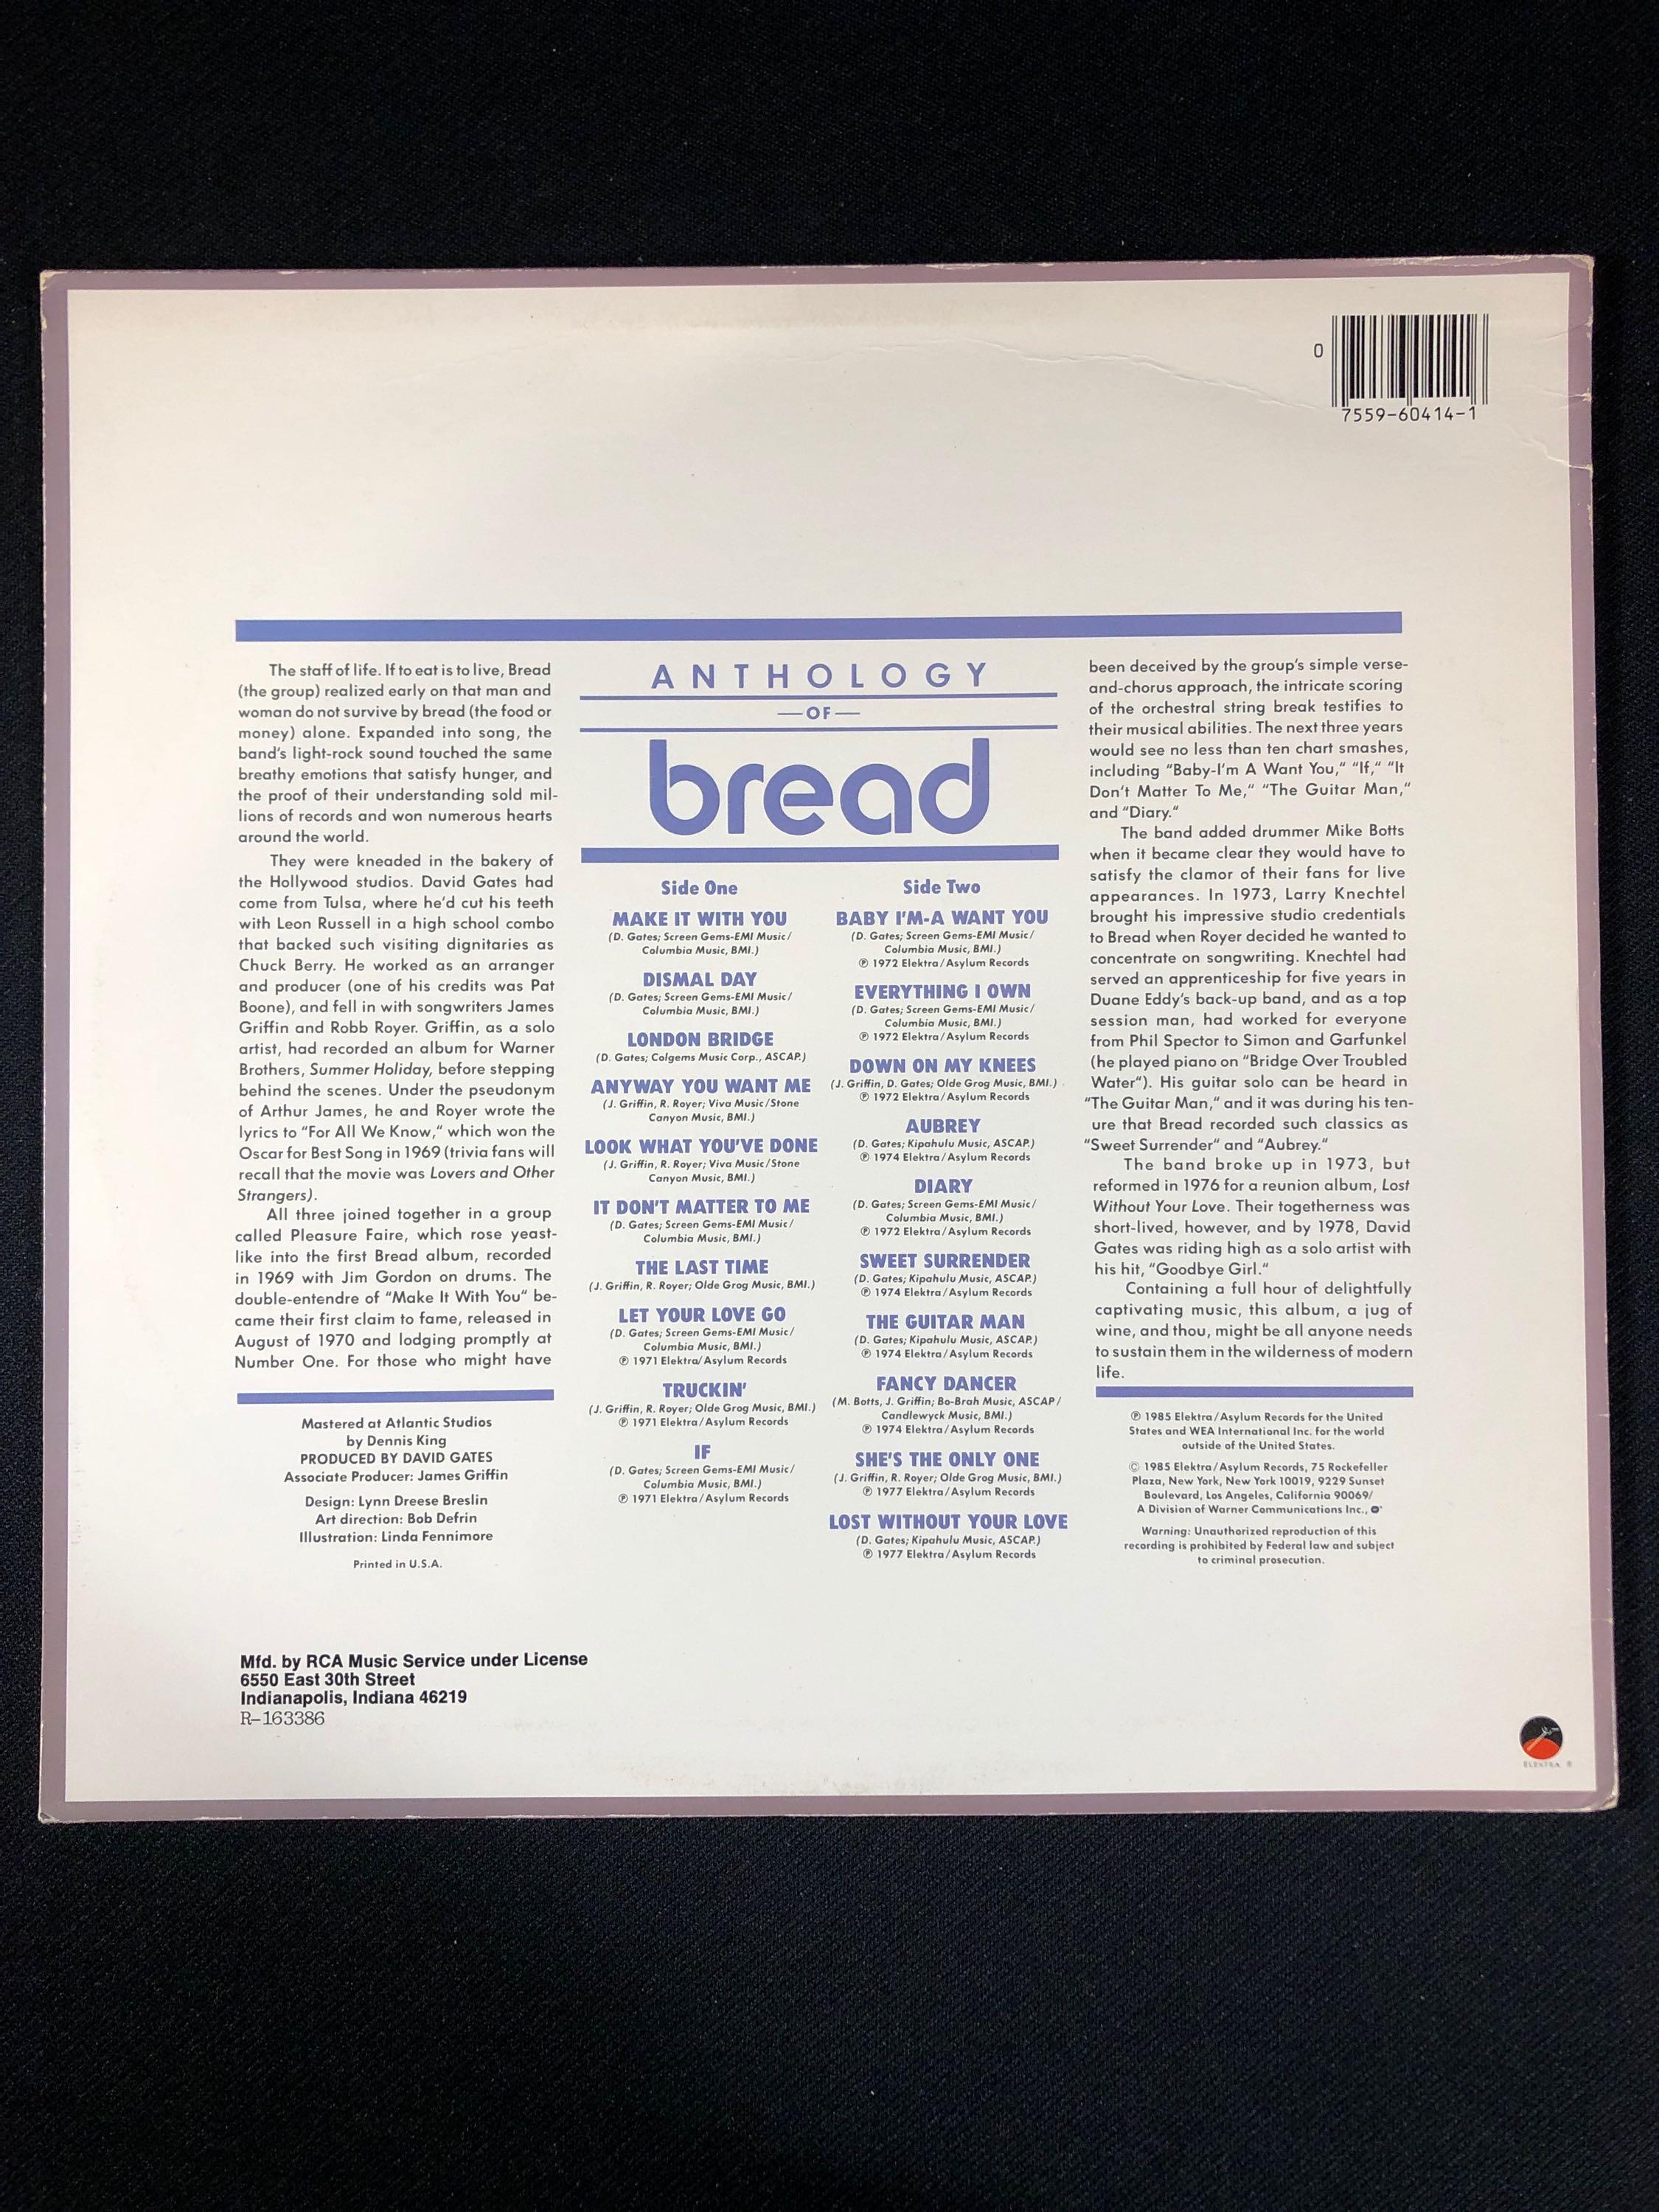 Bread "Anthology of Bread" Autographed Album Signed by David Gates